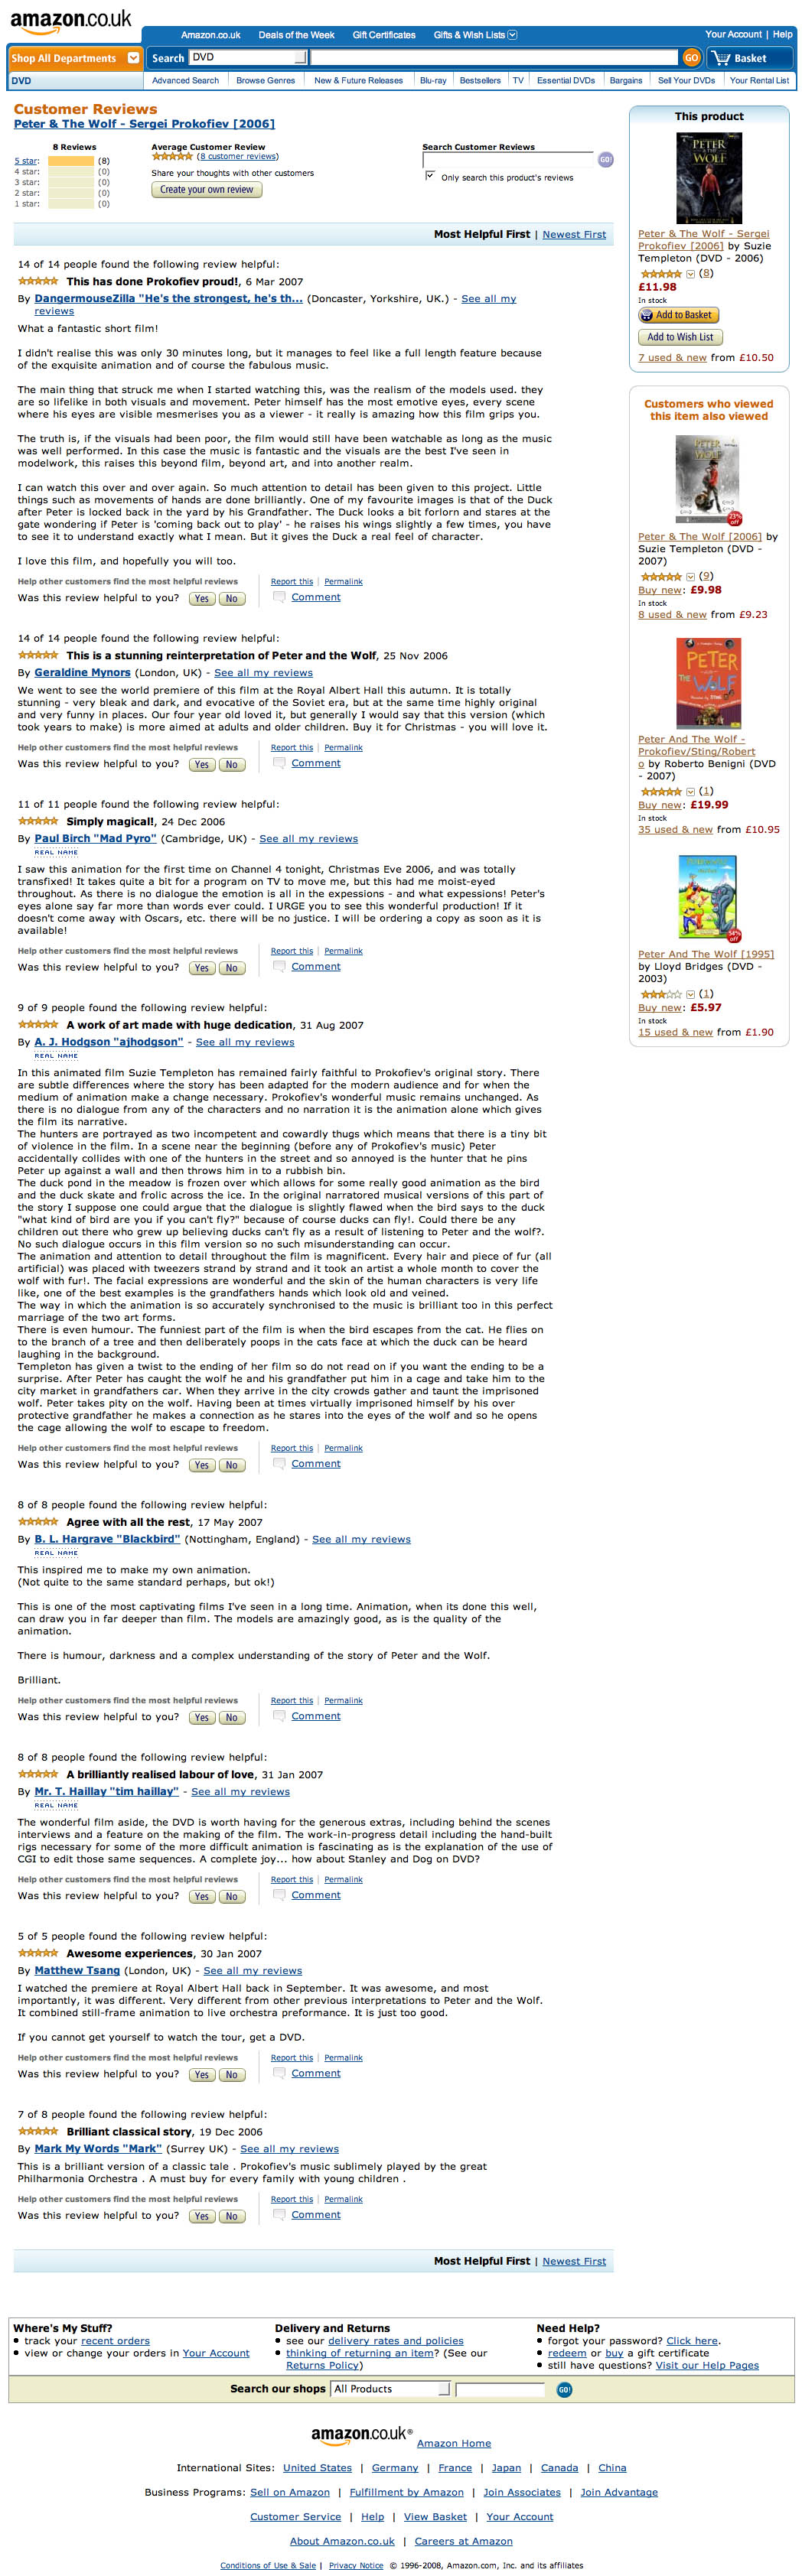 Amazon.co.uk customer reviews of Peter and the Wolf